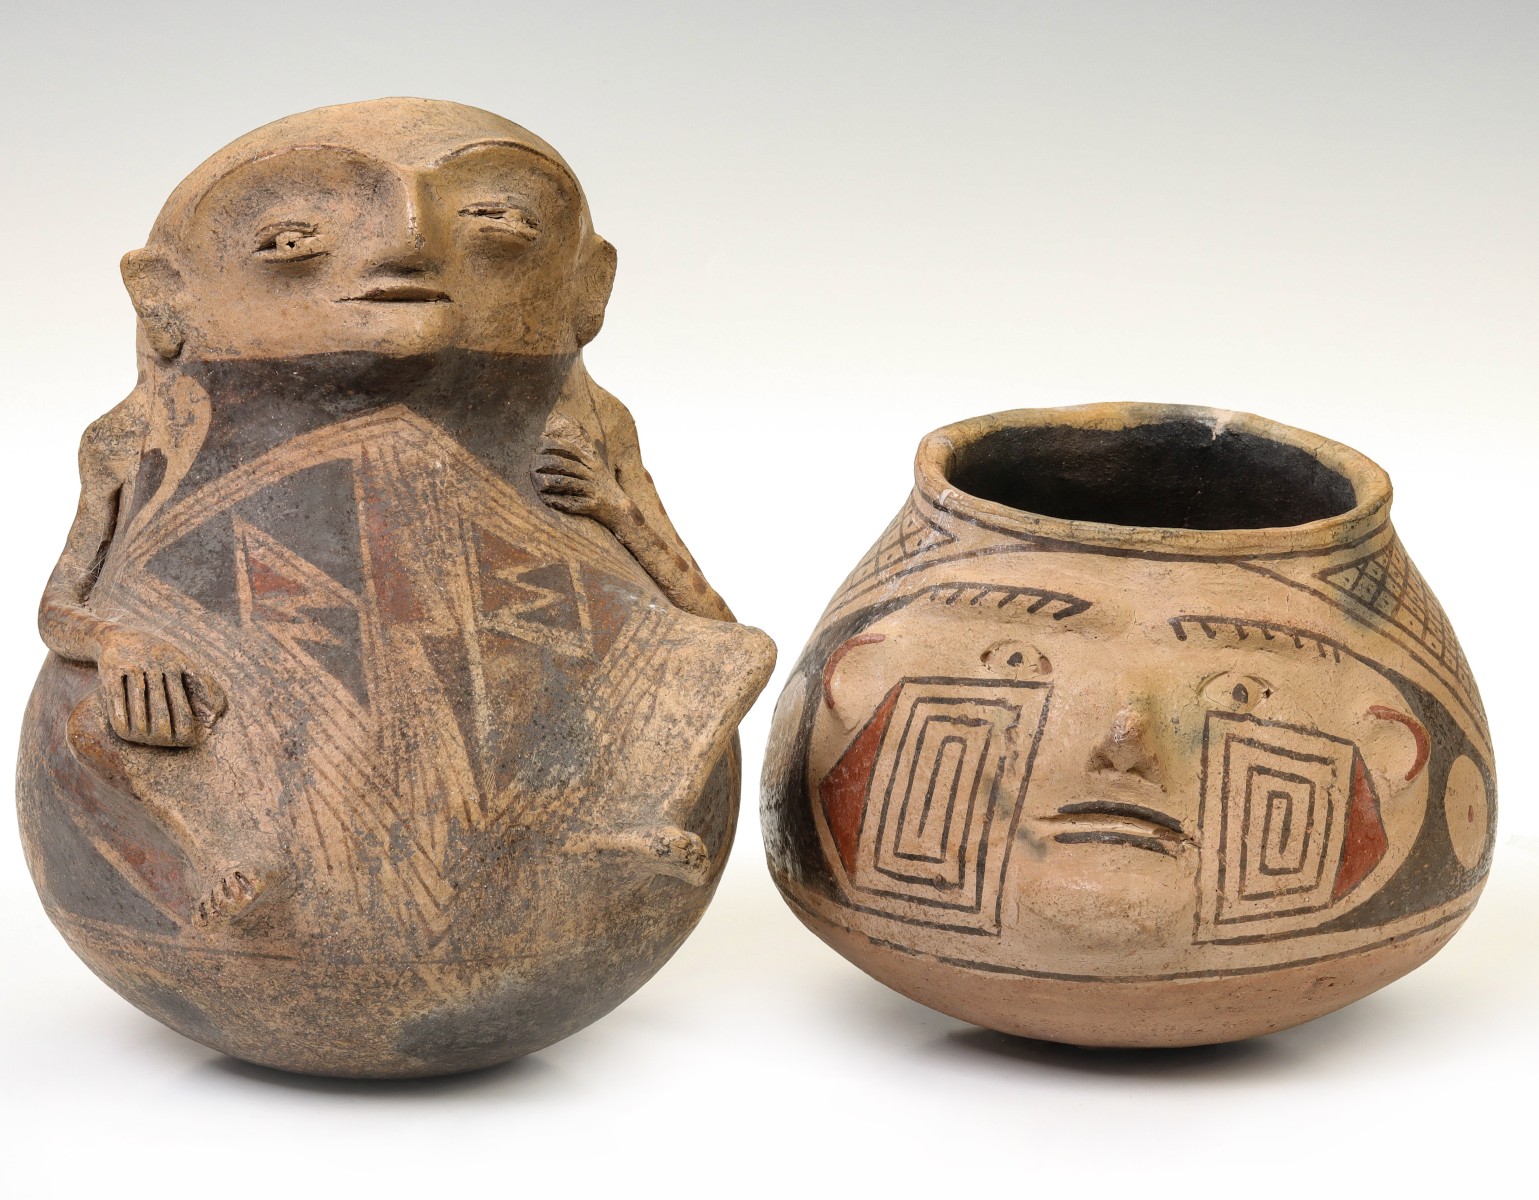 TWO EXAMPLES OF SOUTH AMERICAN EFFIGY POTTERY